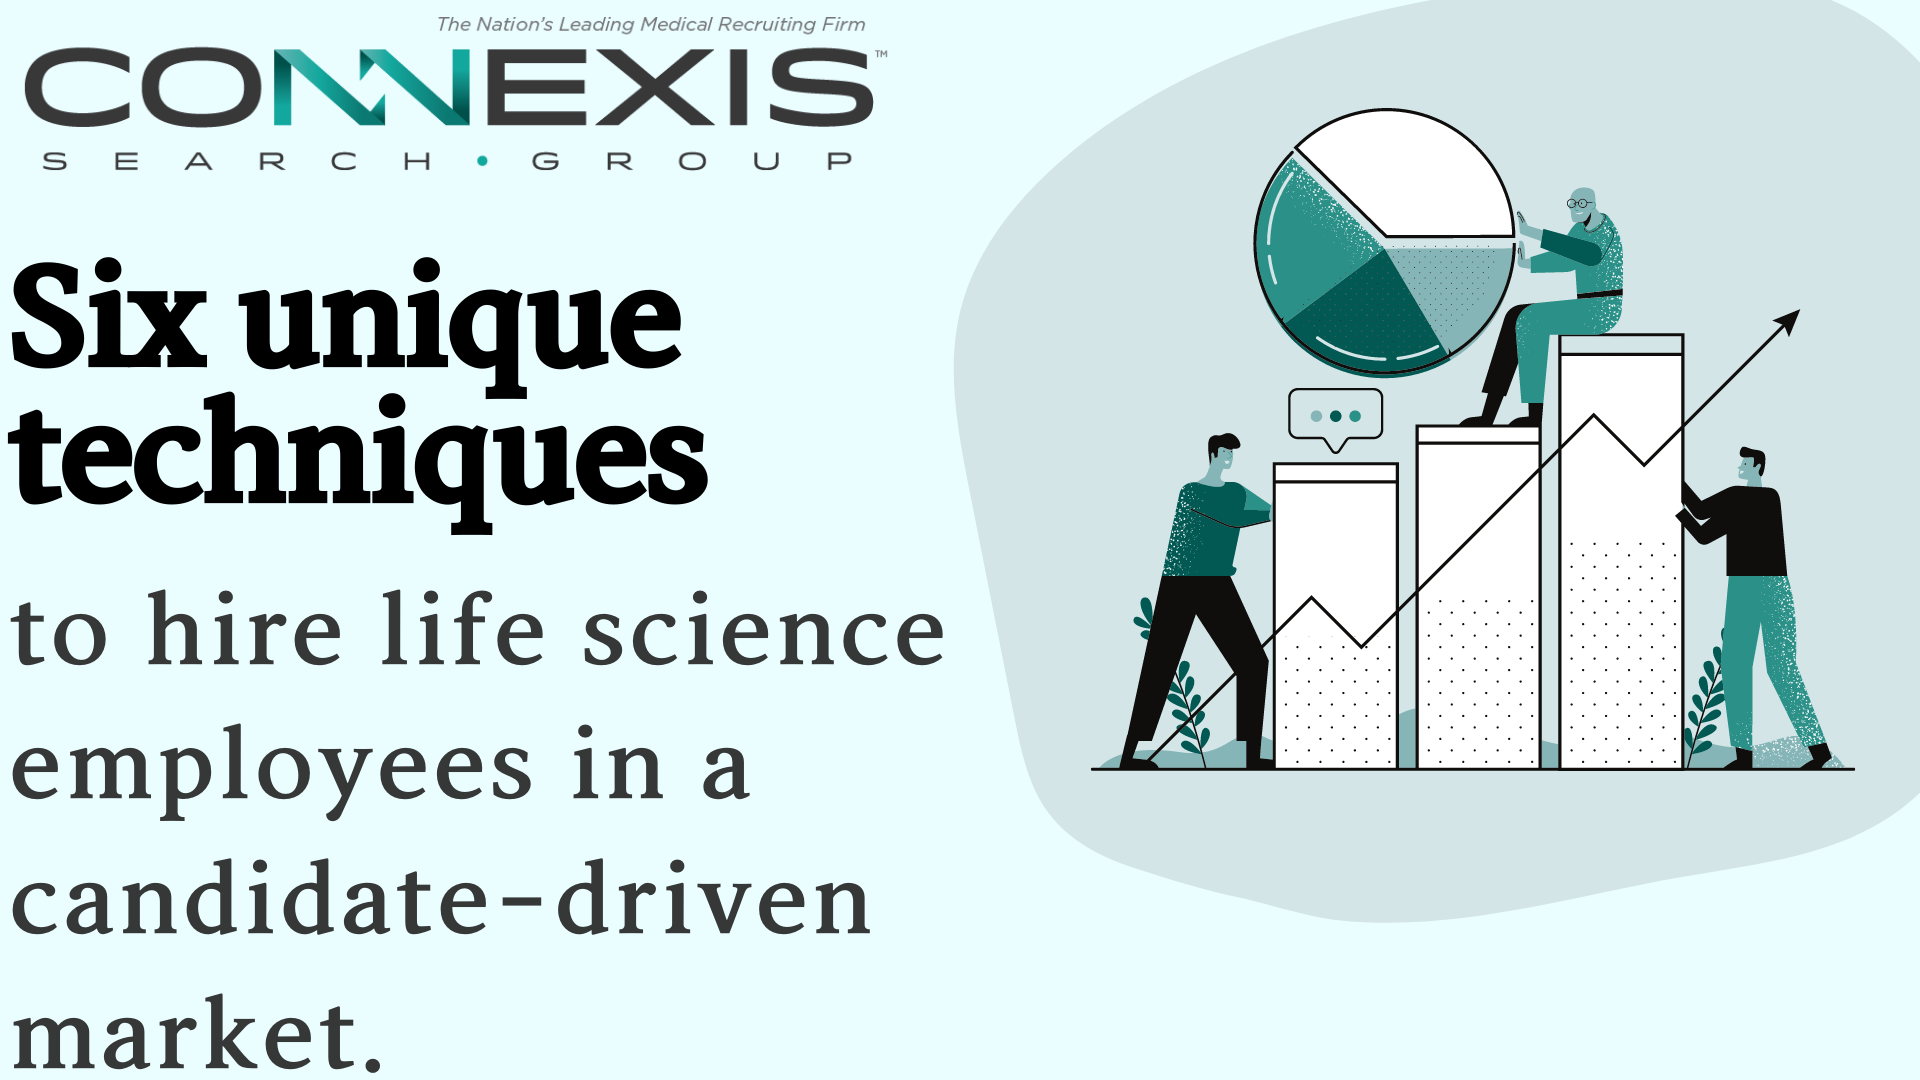 6 tips to Hire Life Science Employees in a Candidate-Driven Market.